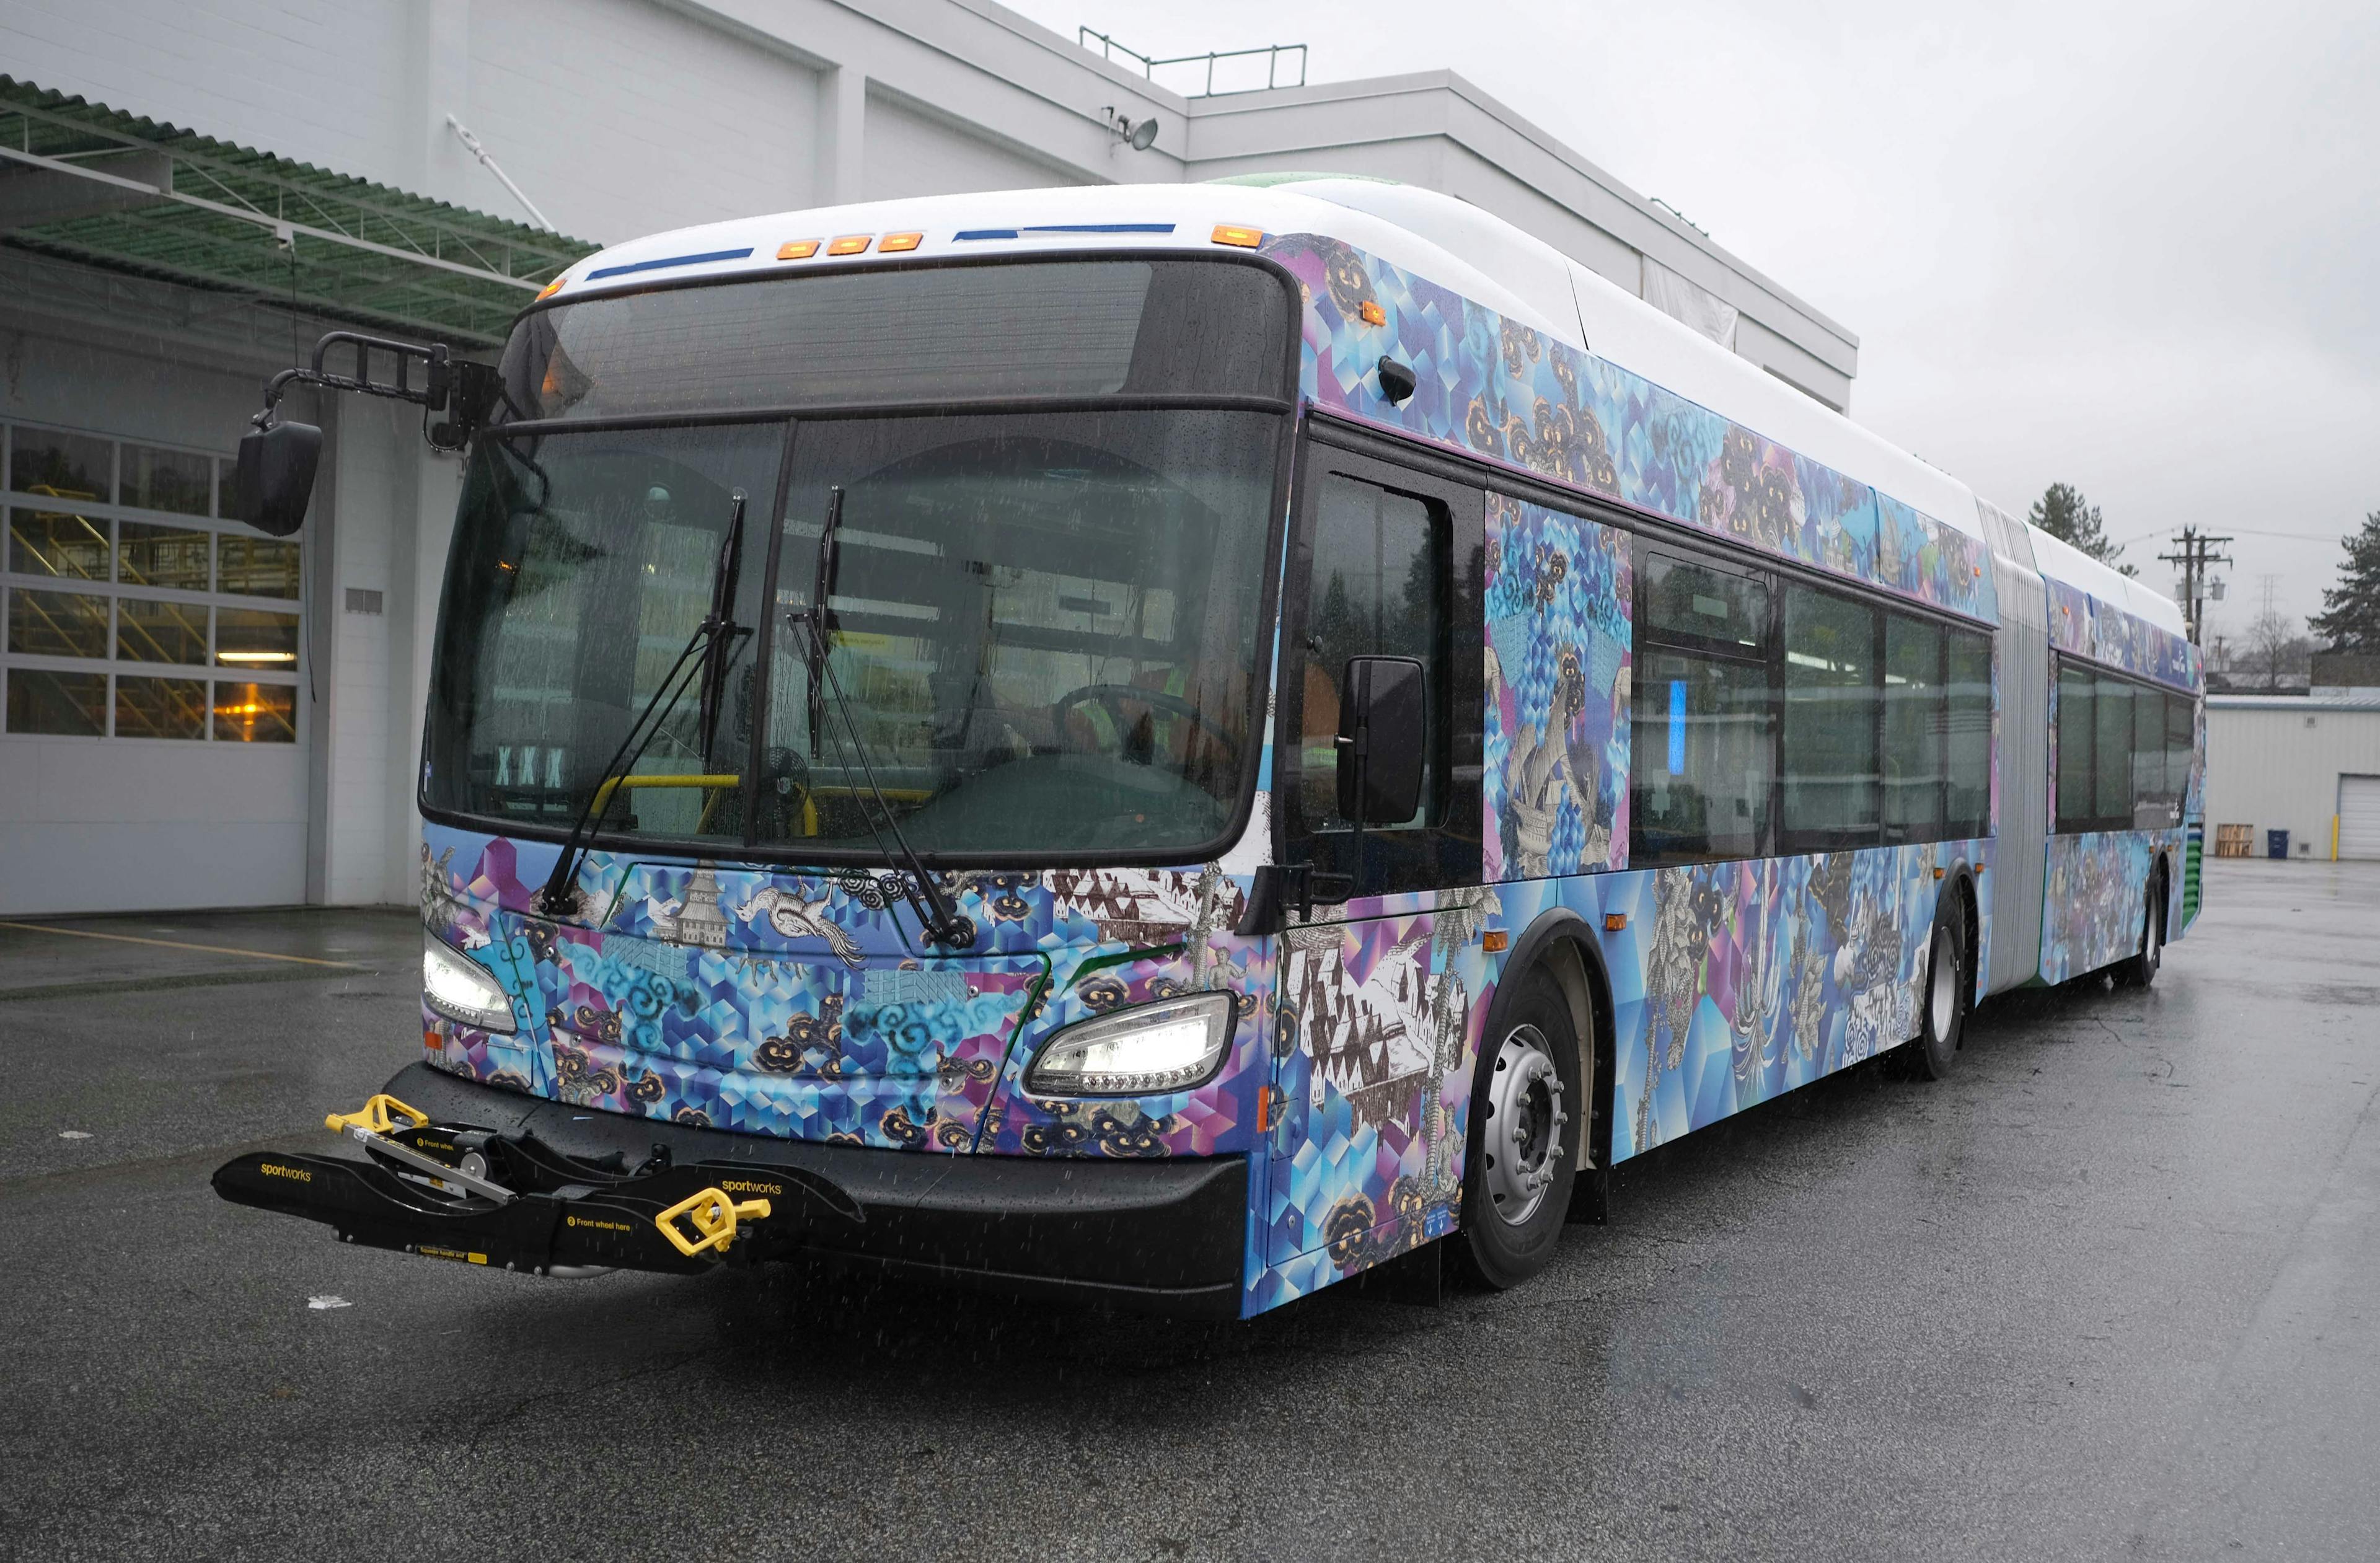 An image of the exterior of a transit bus that is wrapped in a patterned vinyl. The vinyl pattern is made up of a purple and blue geometric background with various illustrations superimposed on top.